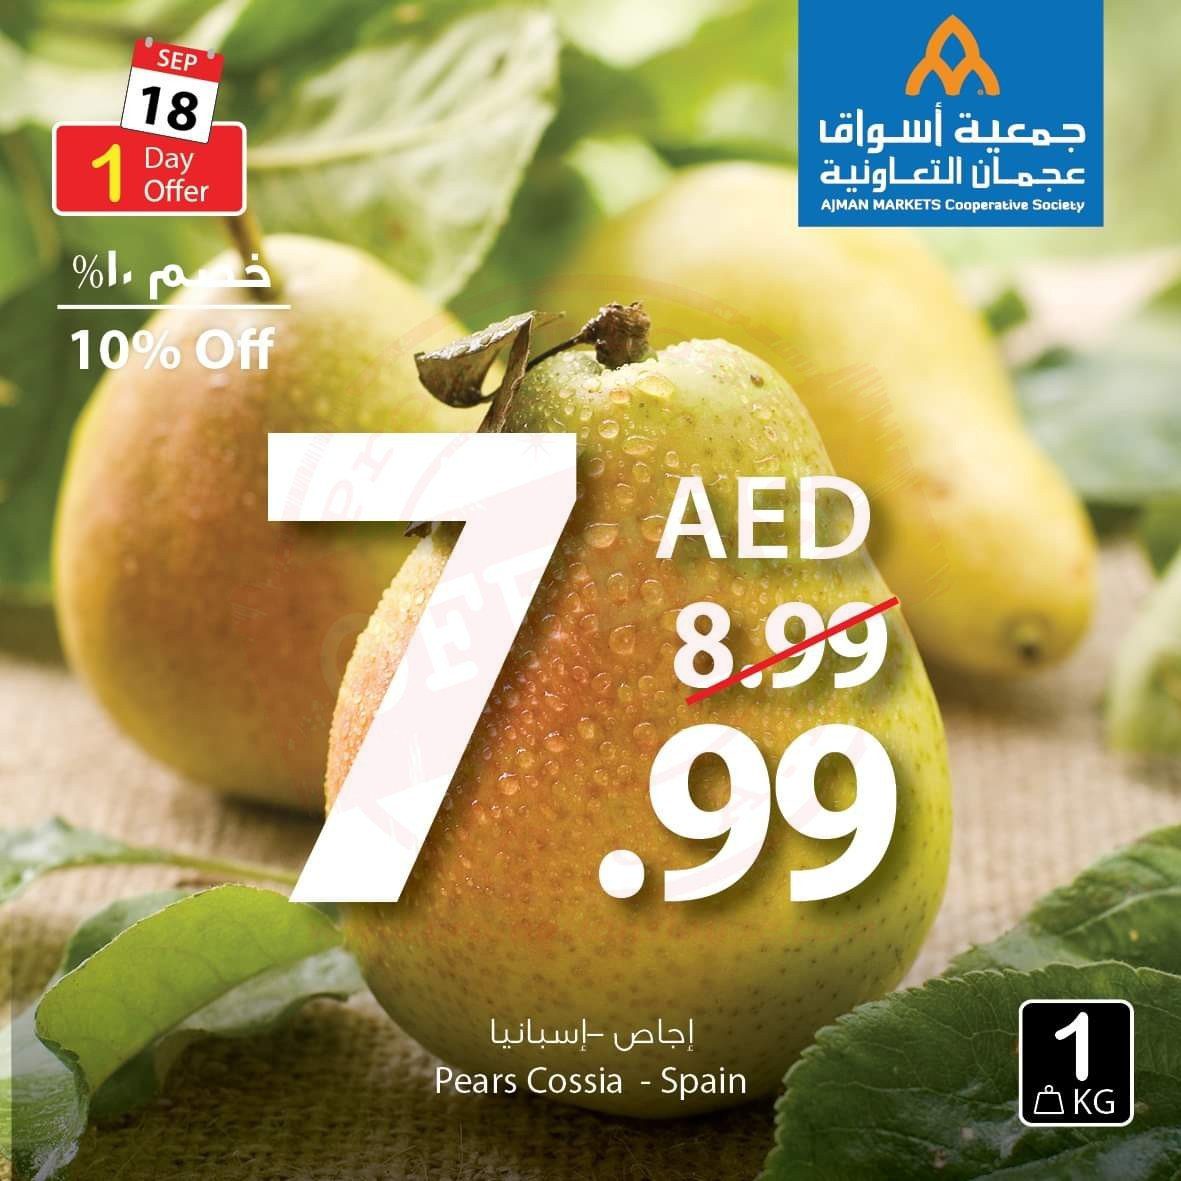 FB IMG 1568800287653 Amazing "One Day" Offer!! Ajman Coop